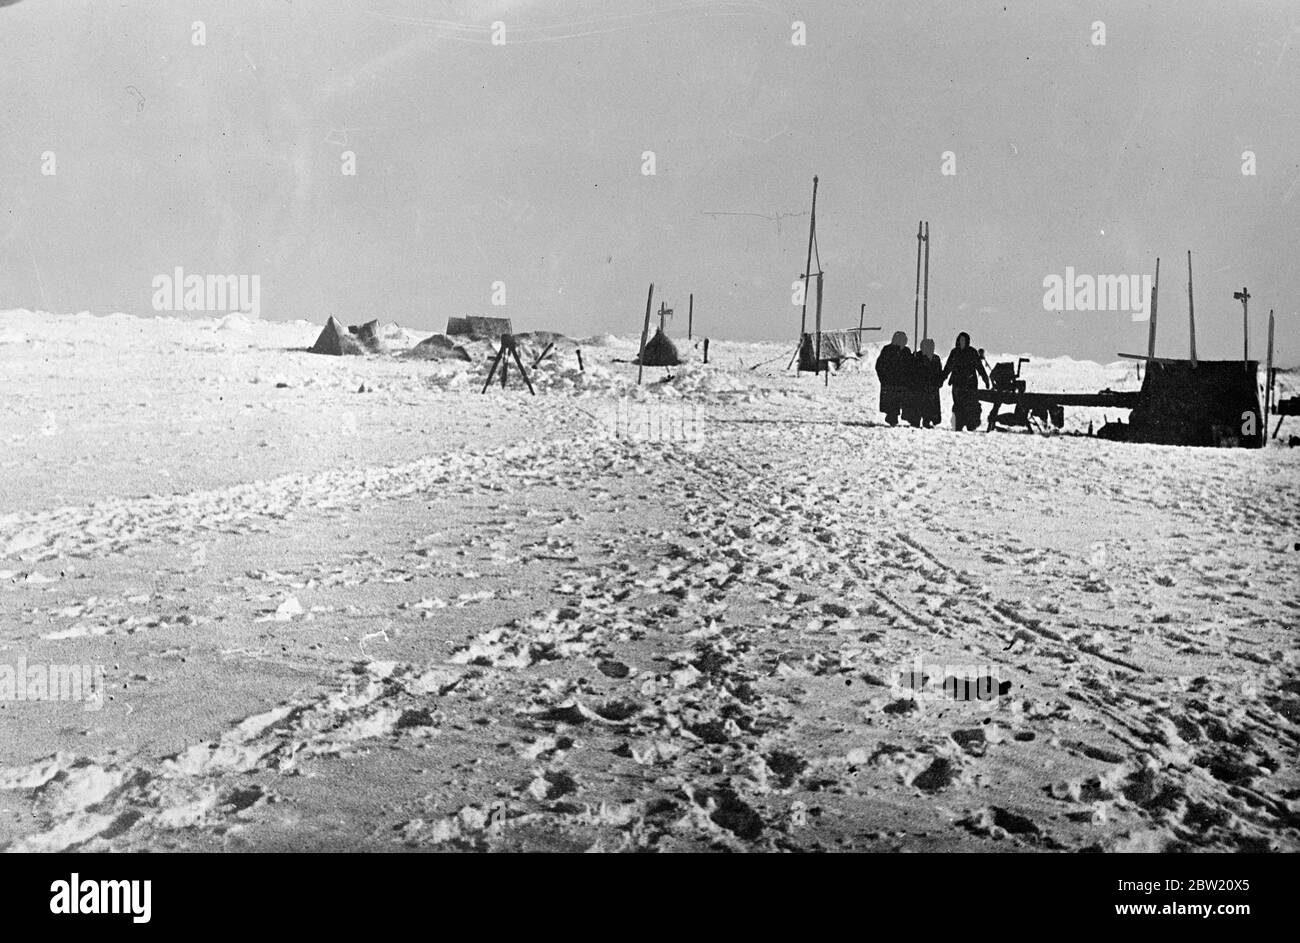 These pictures, from the North Pole, were flown to Moscow and from there to London. The Soviet scientific expedition led by Professor Otto Schmidt successfully established a scientific village on an ice floe in the frozen wilderness from which valuable scientific information and regular weather reports are now being sent by radio for the first time in history. A view of the scientist's camp on the ice floe. 30 June 1937 Stock Photo